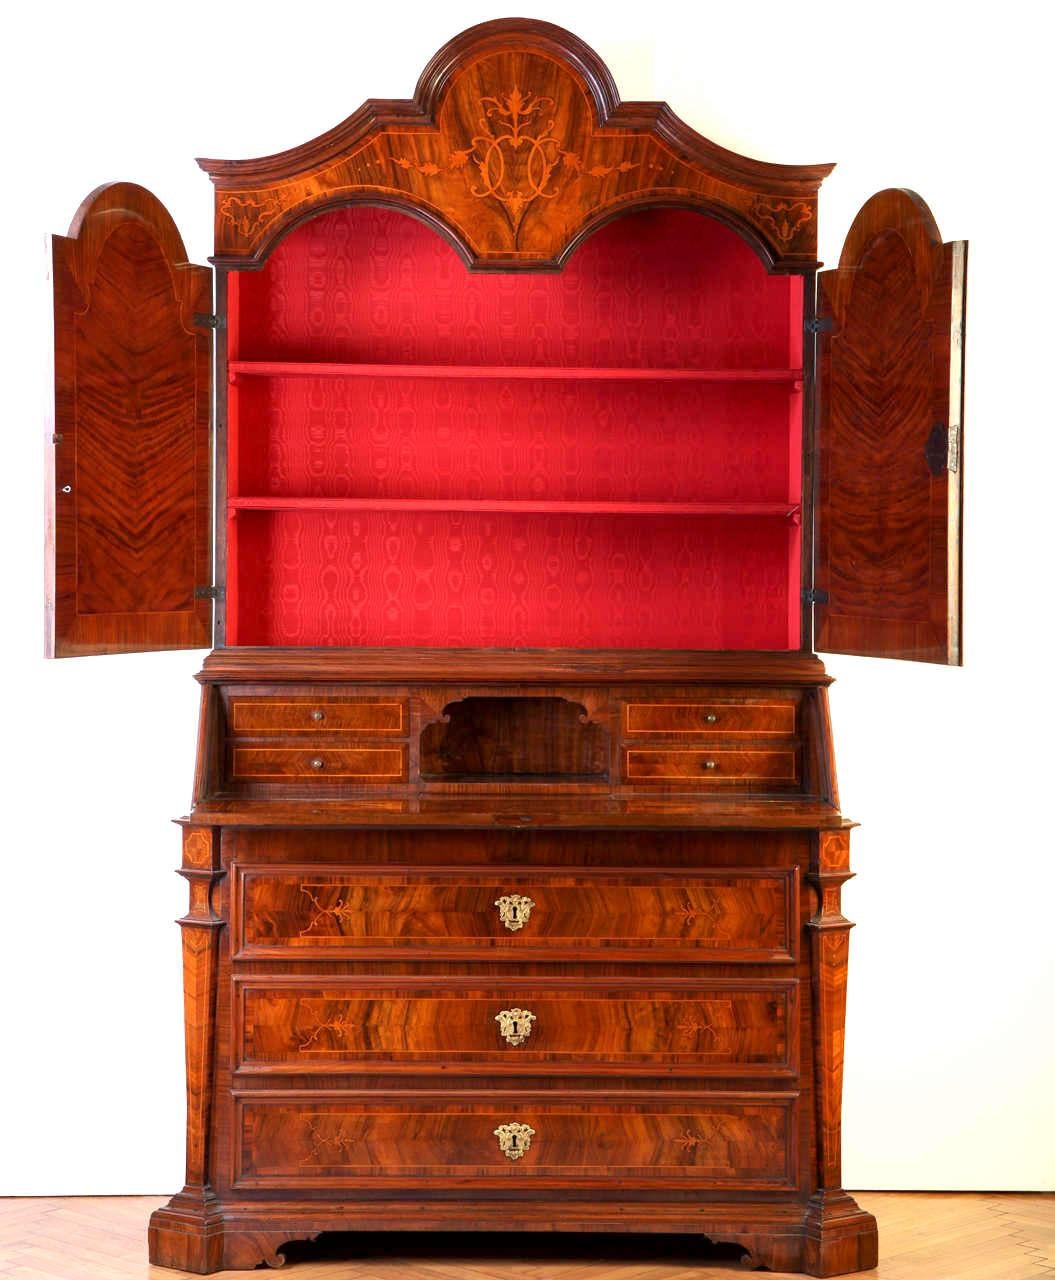 An Italian walnut, parquetry bureau cabinet fruitwood inlaid with scrolling foliage,
The upper section with a shaped carved cresting, a shaped doors opening to reveal three shelves, the lower section with a sloping-front,
Opening to reveal a